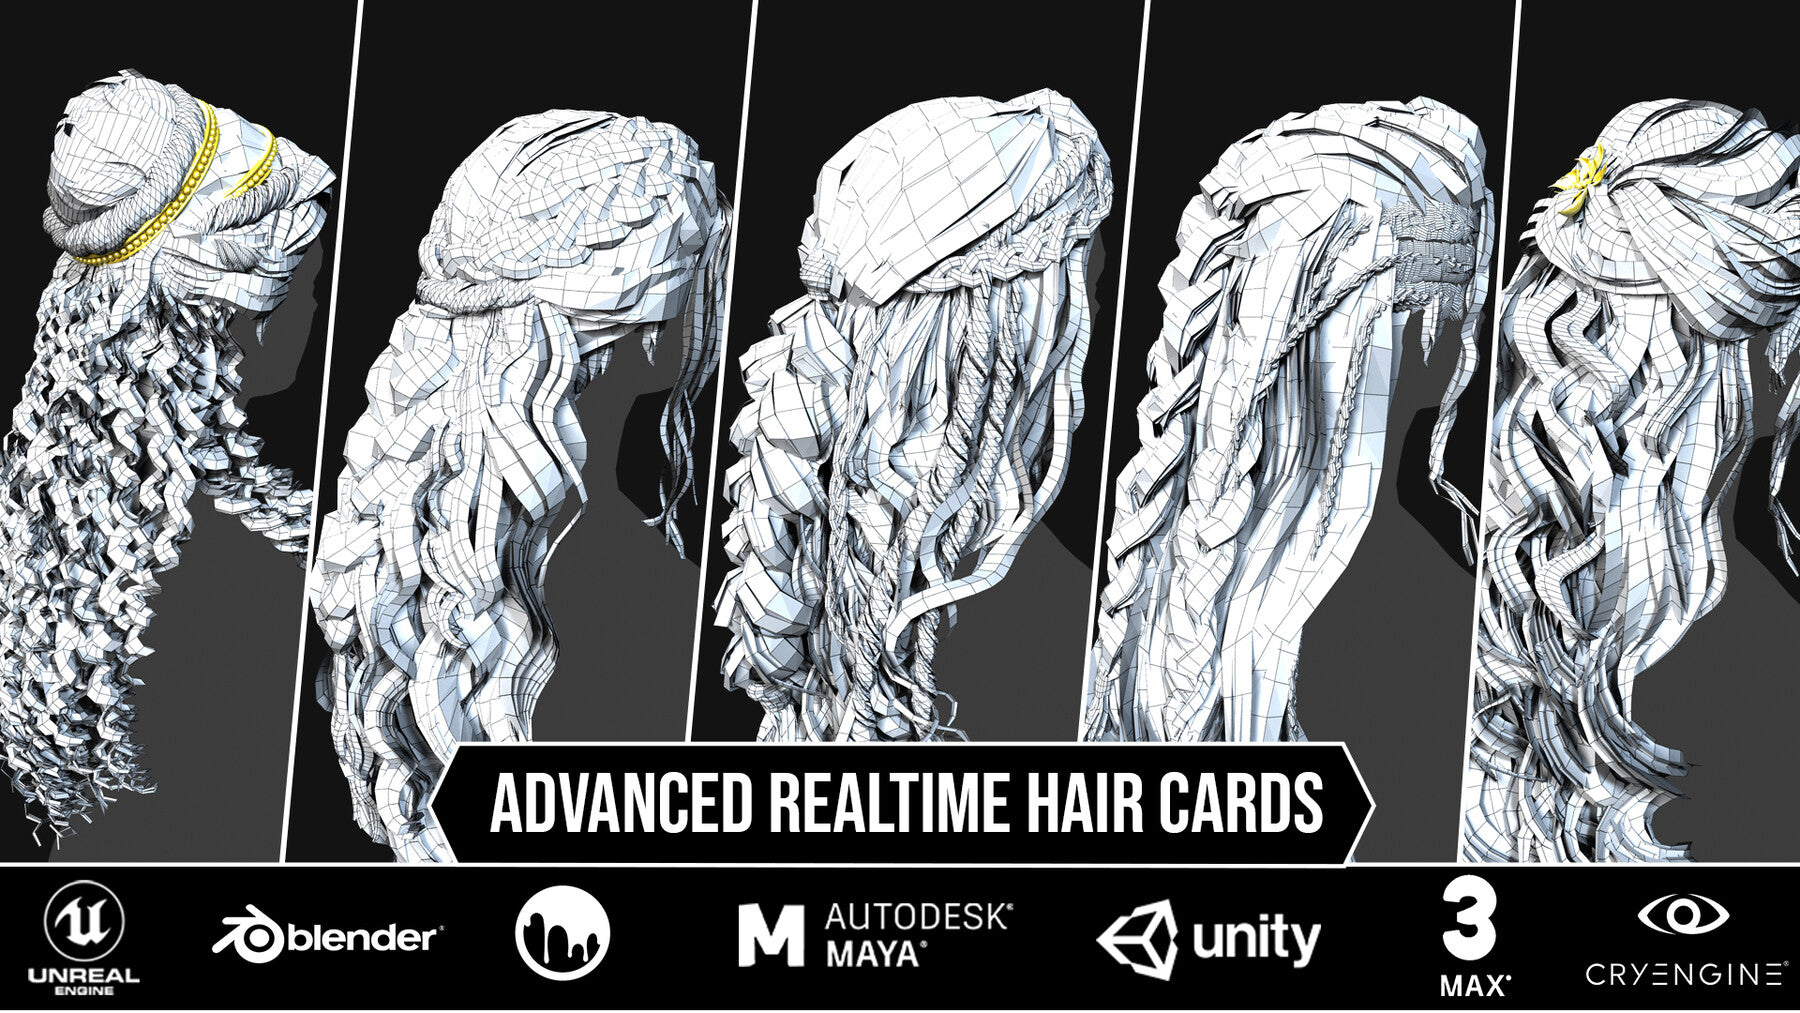 10 Advanced Realtime Hair Cards